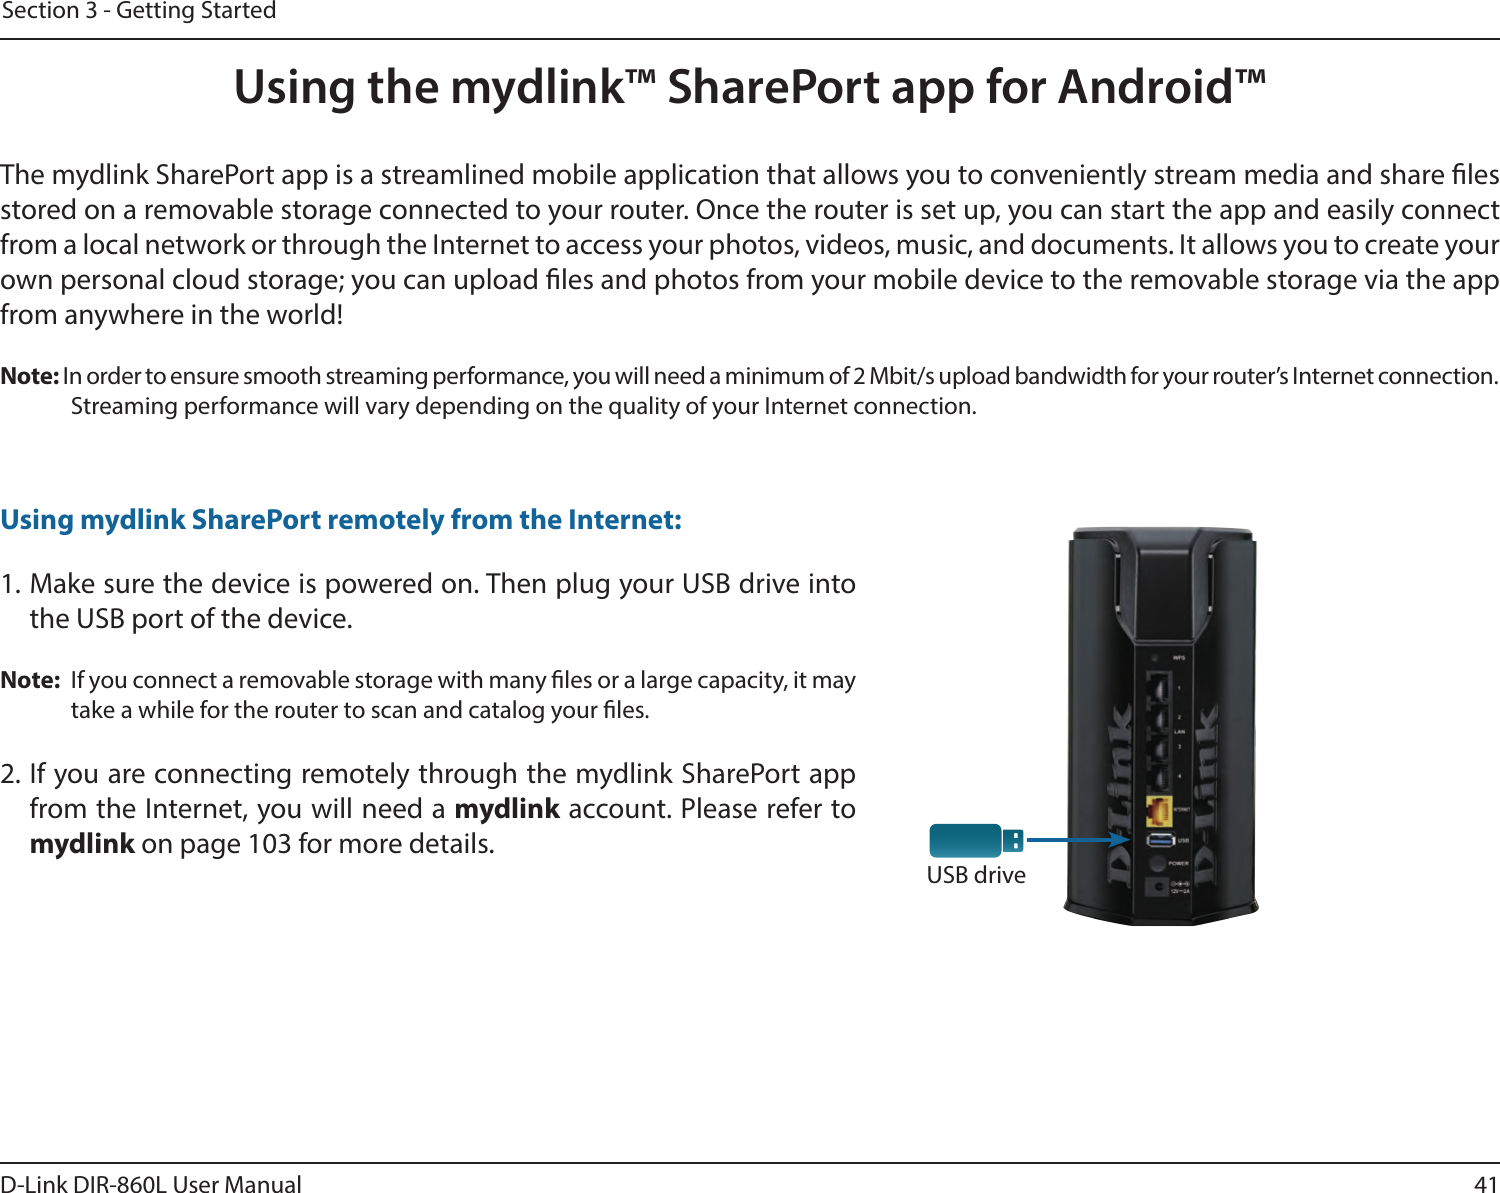 41D-Link DIR-860L User ManualSection 3 - Getting StartedUsing the mydlink™ SharePort app for Android™USB driveThe mydlink SharePort app is a streamlined mobile application that allows you to conveniently stream media and share les stored on a removable storage connected to your router. Once the router is set up, you can start the app and easily connect from a local network or through the Internet to access your photos, videos, music, and documents. It allows you to create your own personal cloud storage; you can upload les and photos from your mobile device to the removable storage via the app from anywhere in the world!Note: In order to ensure smooth streaming performance, you will need a minimum of 2 Mbit/s upload bandwidth for your router’s Internet connection. Streaming performance will vary depending on the quality of your Internet connection.1. Make sure the device is powered on. Then plug your USB drive into the USB port of the device.Note:  If you connect a removable storage with many les or a large capacity, it may take a while for the router to scan and catalog your les.2. If you are connecting remotely through the mydlink SharePort app from the Internet, you will need a mydlink account. Please refer to  mydlink on page 103 for more details.Using mydlink SharePort remotely from the Internet: